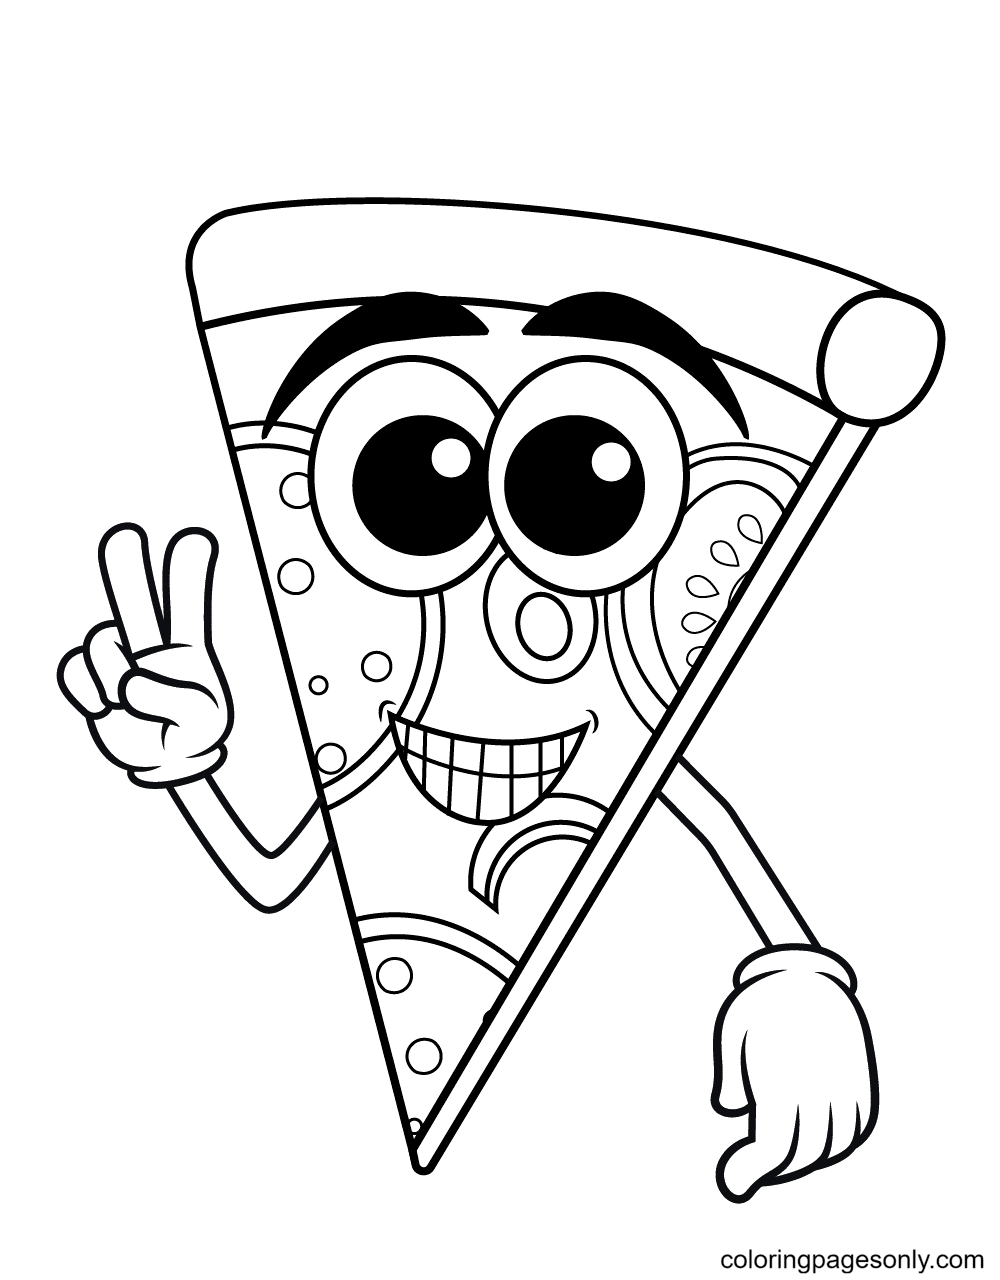 Funny Slice of Pizza Coloring Pages